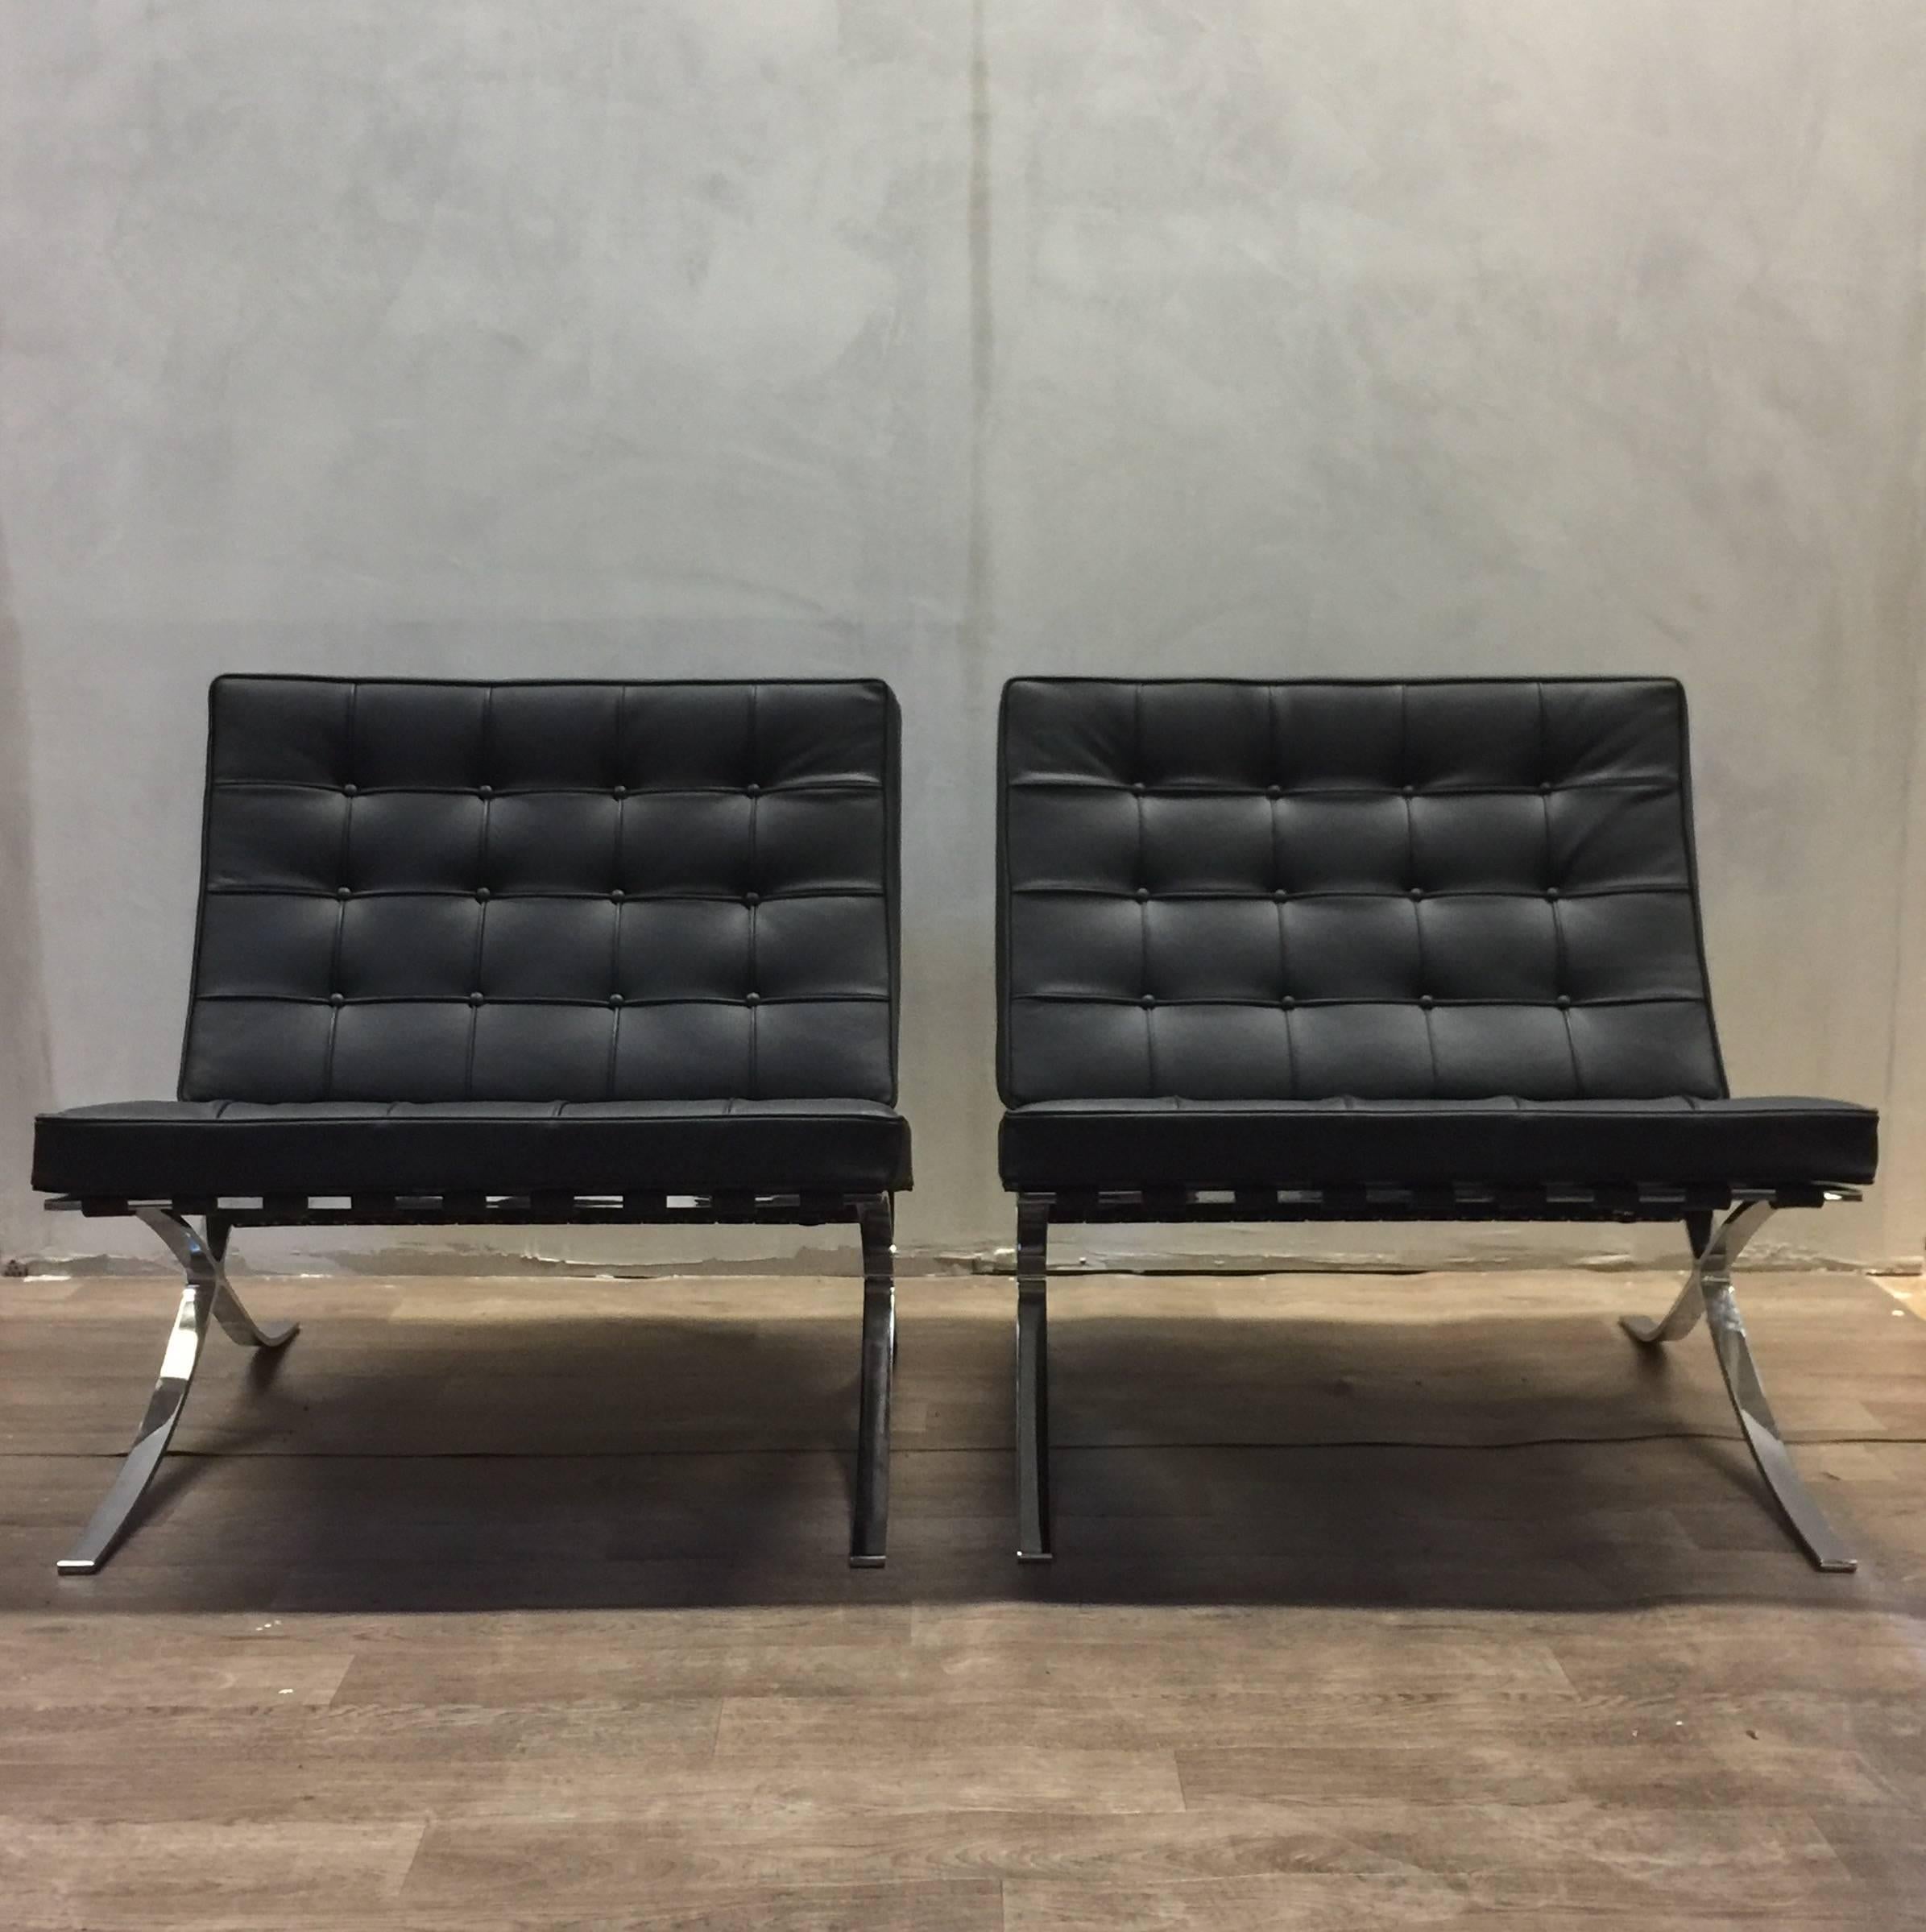 Pair of iconic Barcelona chairs design by Mies van der Rohe in 1929, Knoll edition. Perfect conditions.